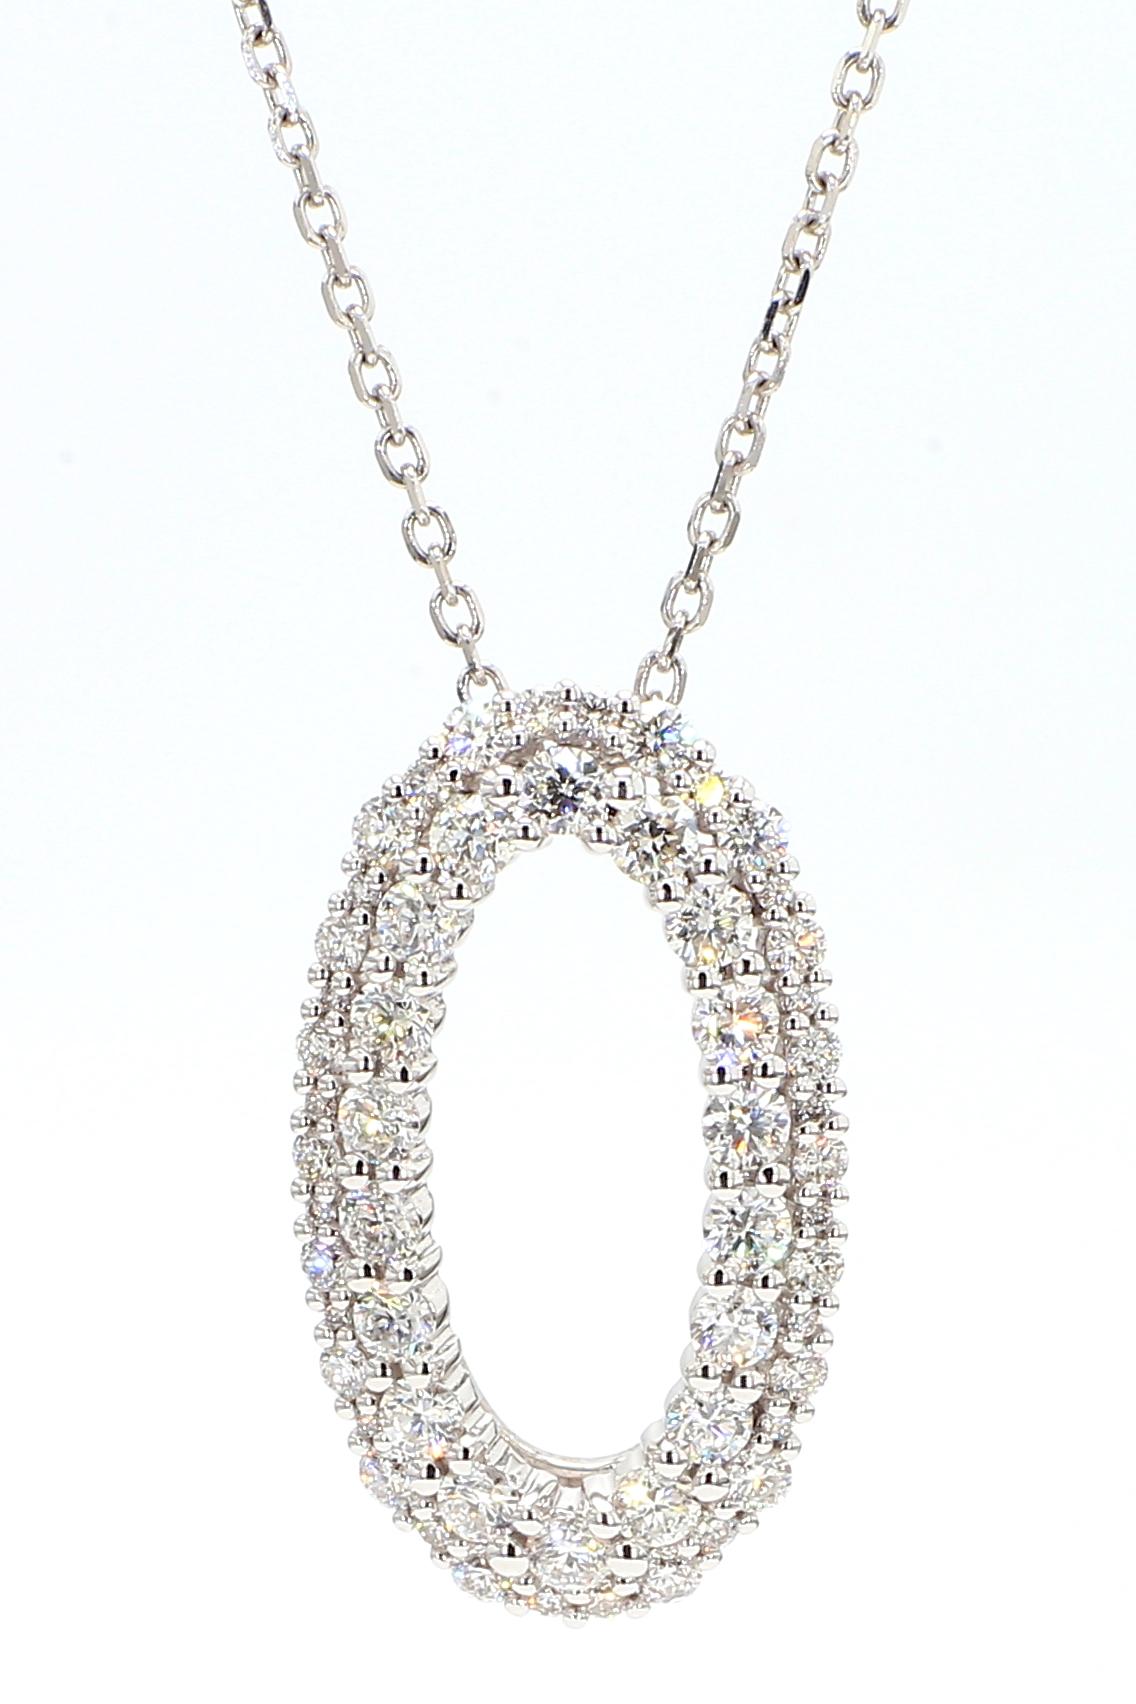 RareGemWorld's classic diamond pendant. Mounted in a beautiful 14K White Gold setting with natural round white diamond melee. This pendant is guaranteed to impress and enhance your personal collection.

Total Weight: 1.44cts

Natural Round White